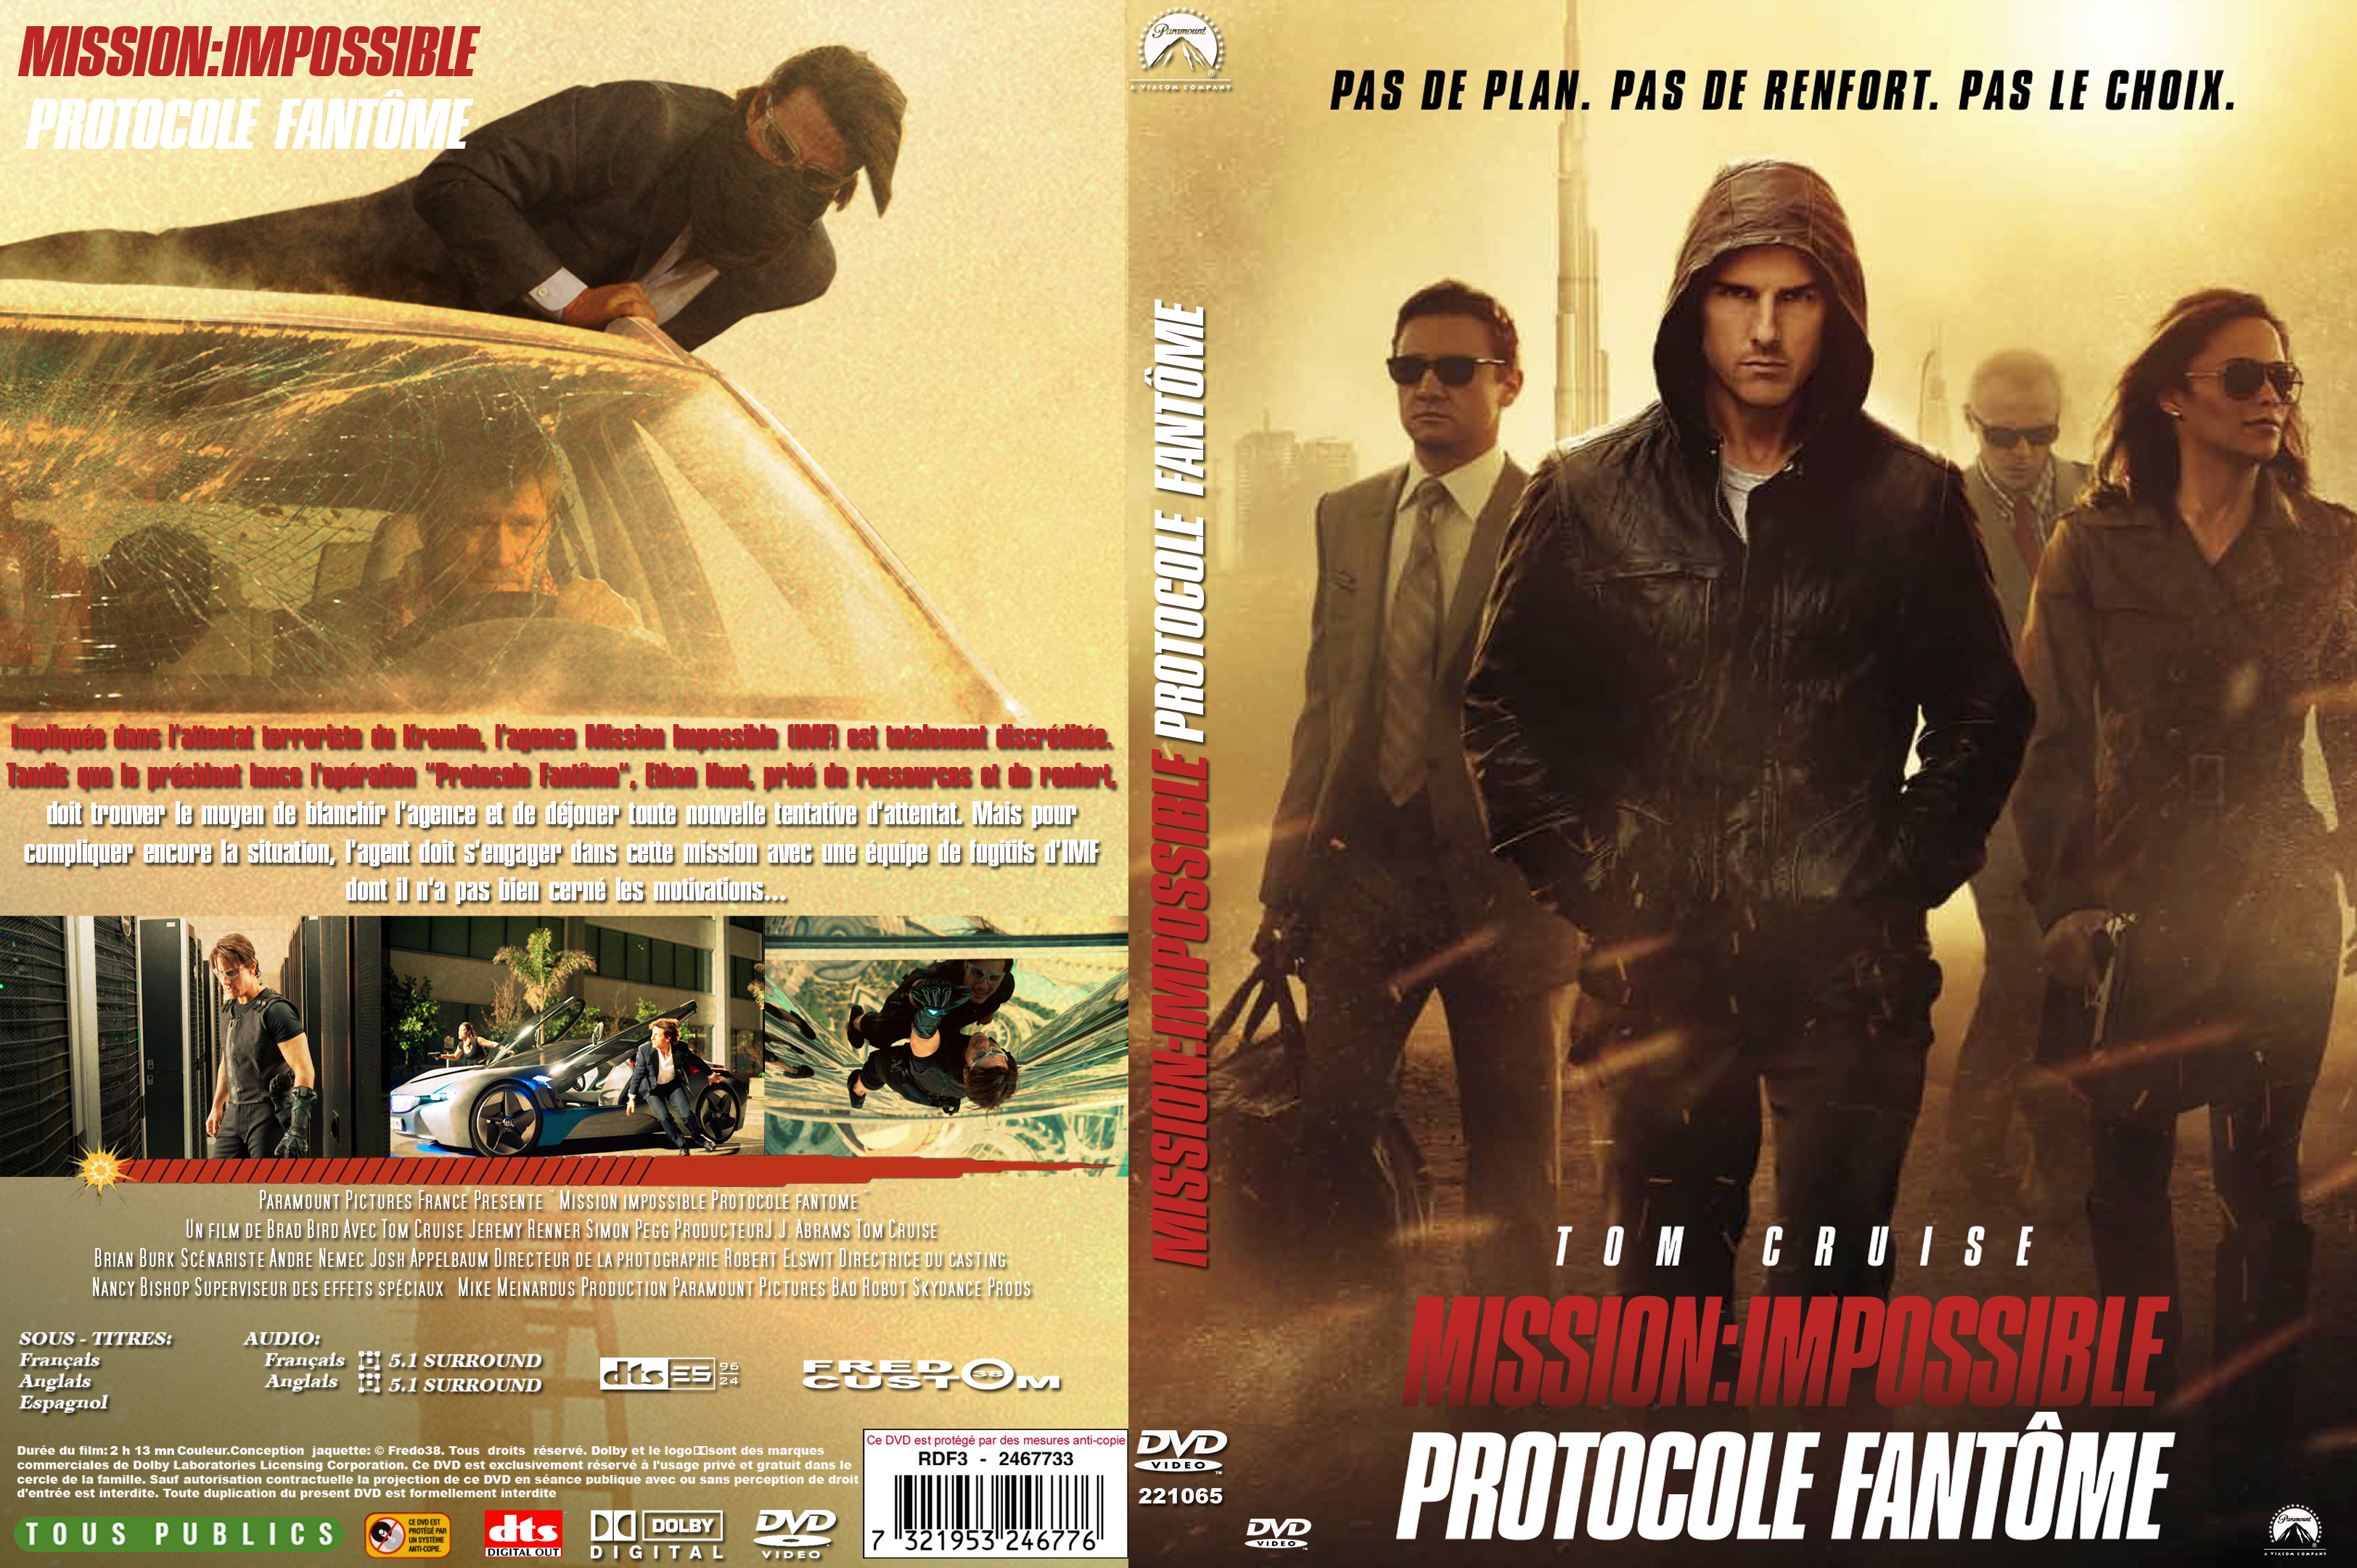 Jaquette DVD Mission Impossible Protocole fantme custom